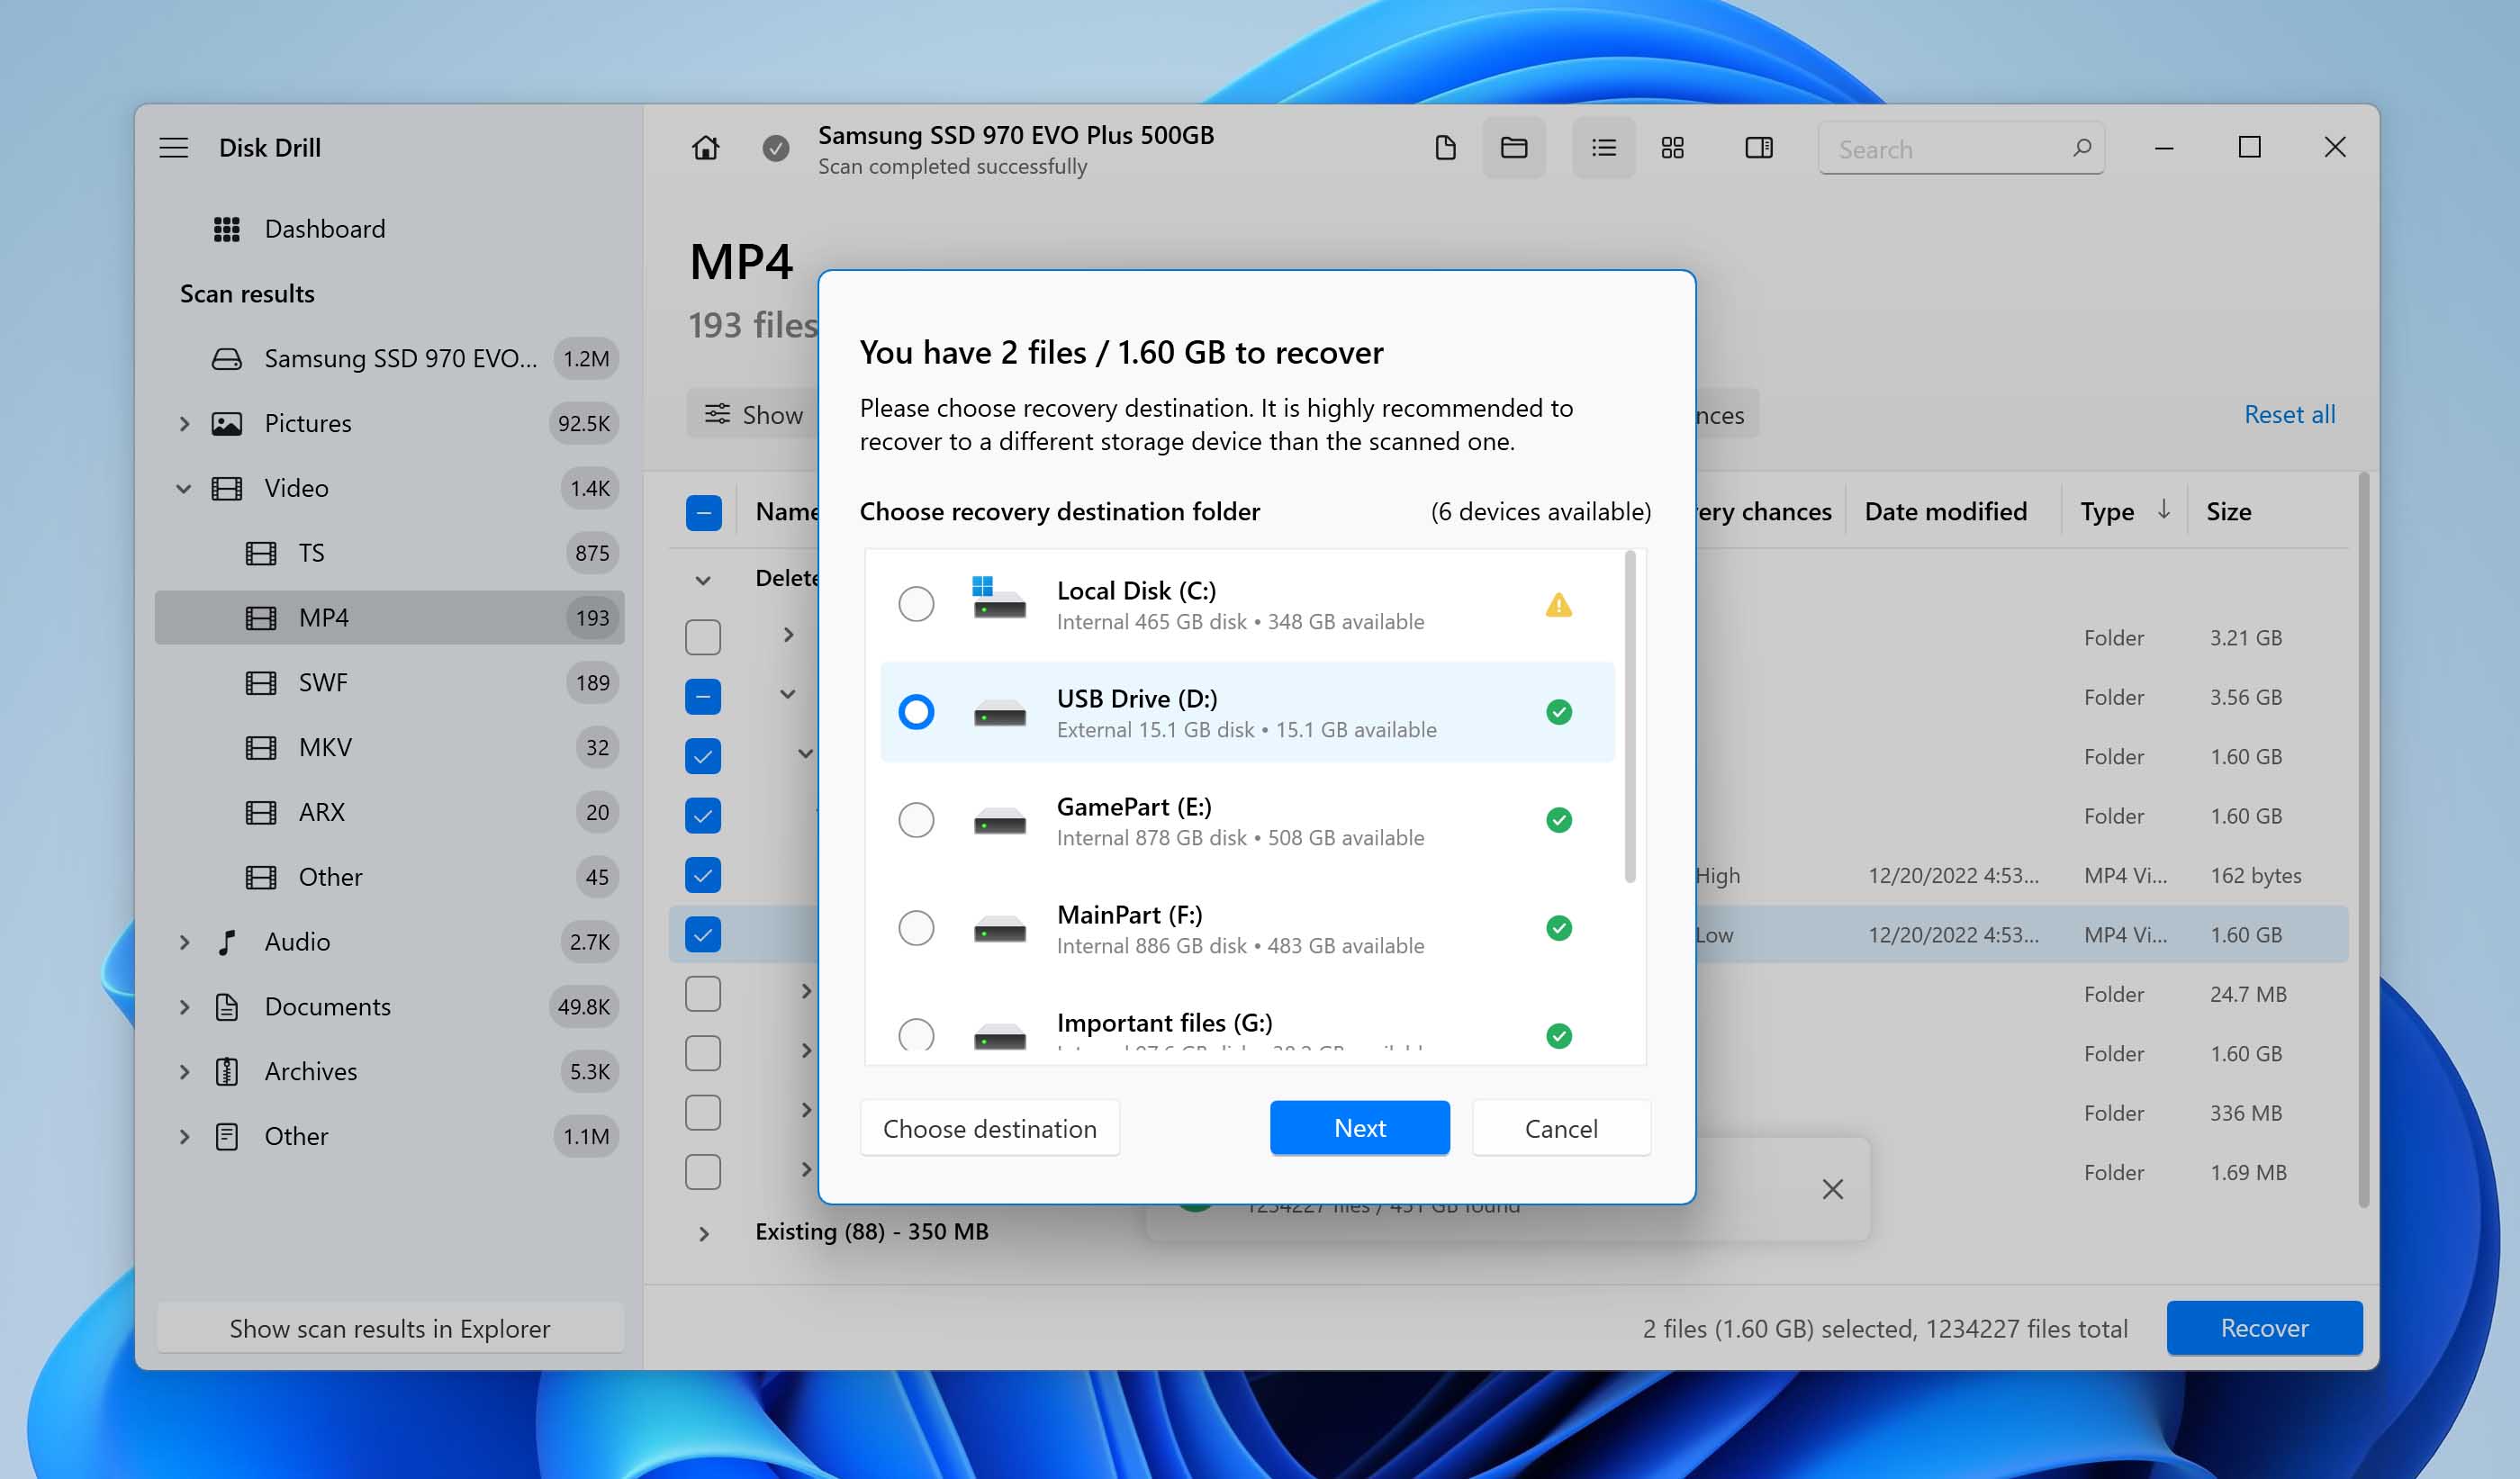 Choose a recovery path for MP4 files in Disk Drill.